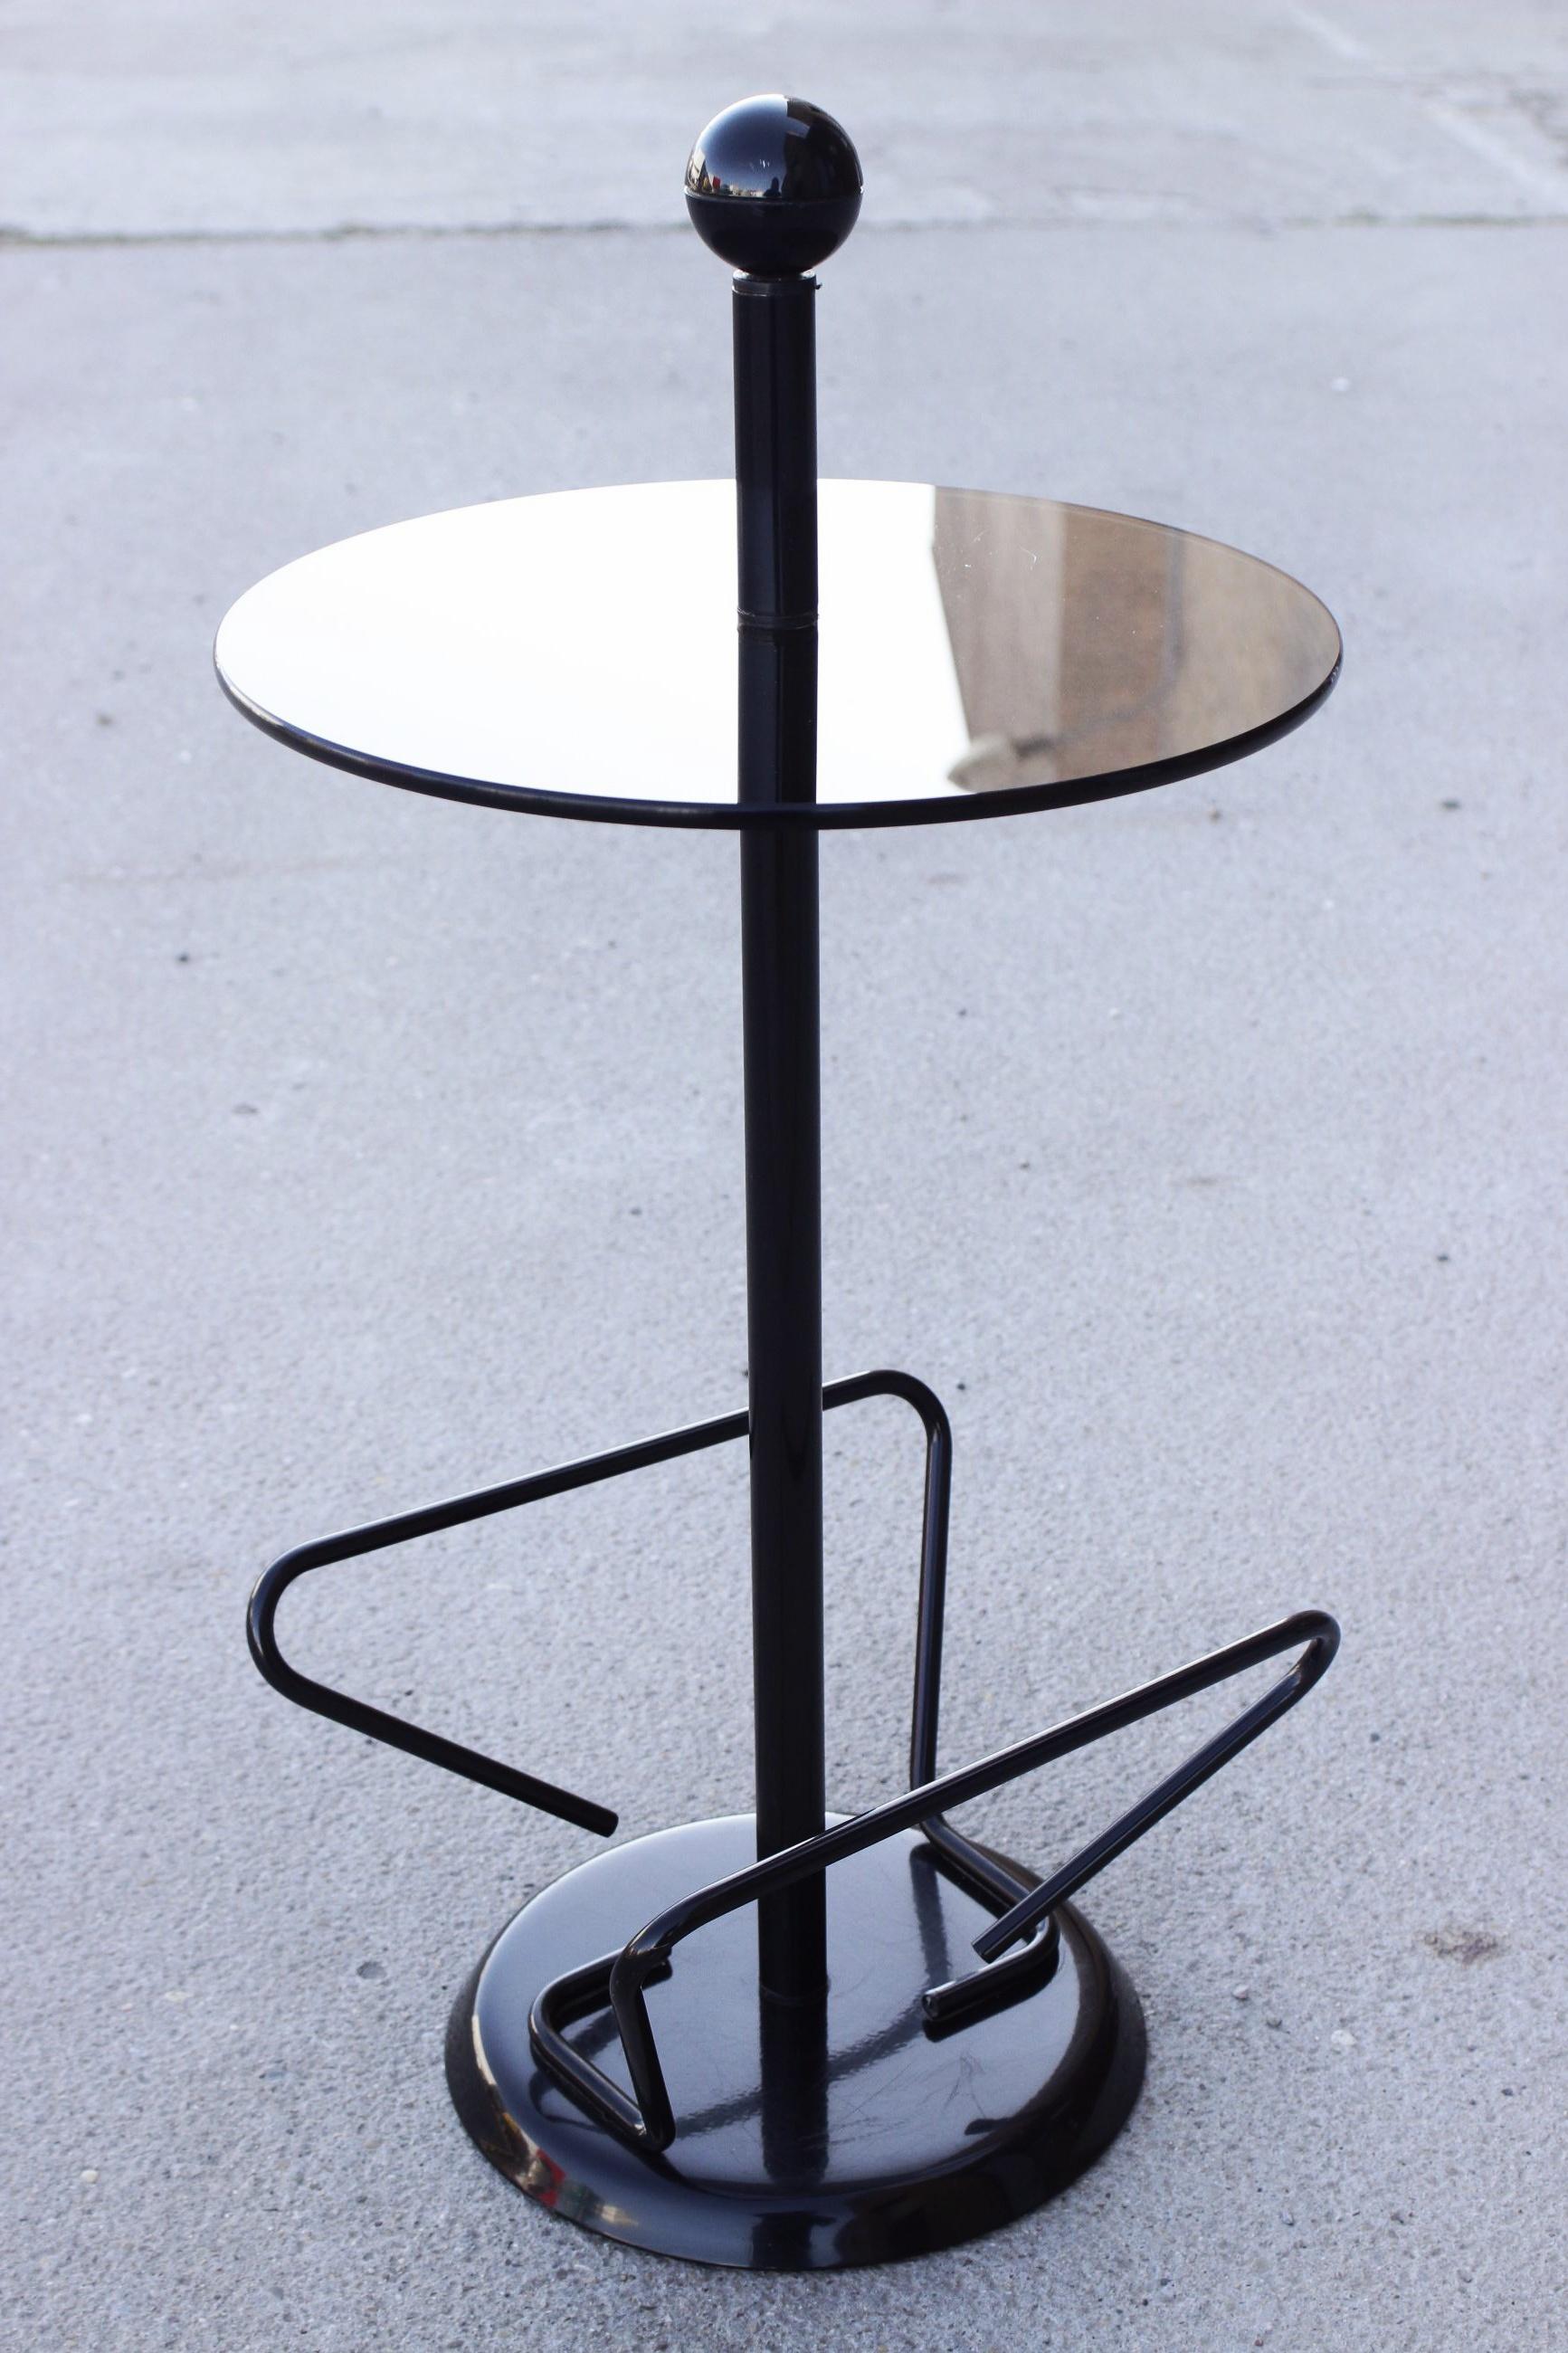 Italian vintage side table with magazine rack, Italy circa 1980. Reminescent of the productions of Ettore Sottsass and the Memphis group, 

The circular top is in high quality smoked glass, the sphere on top is plastic, the rest of the table is in